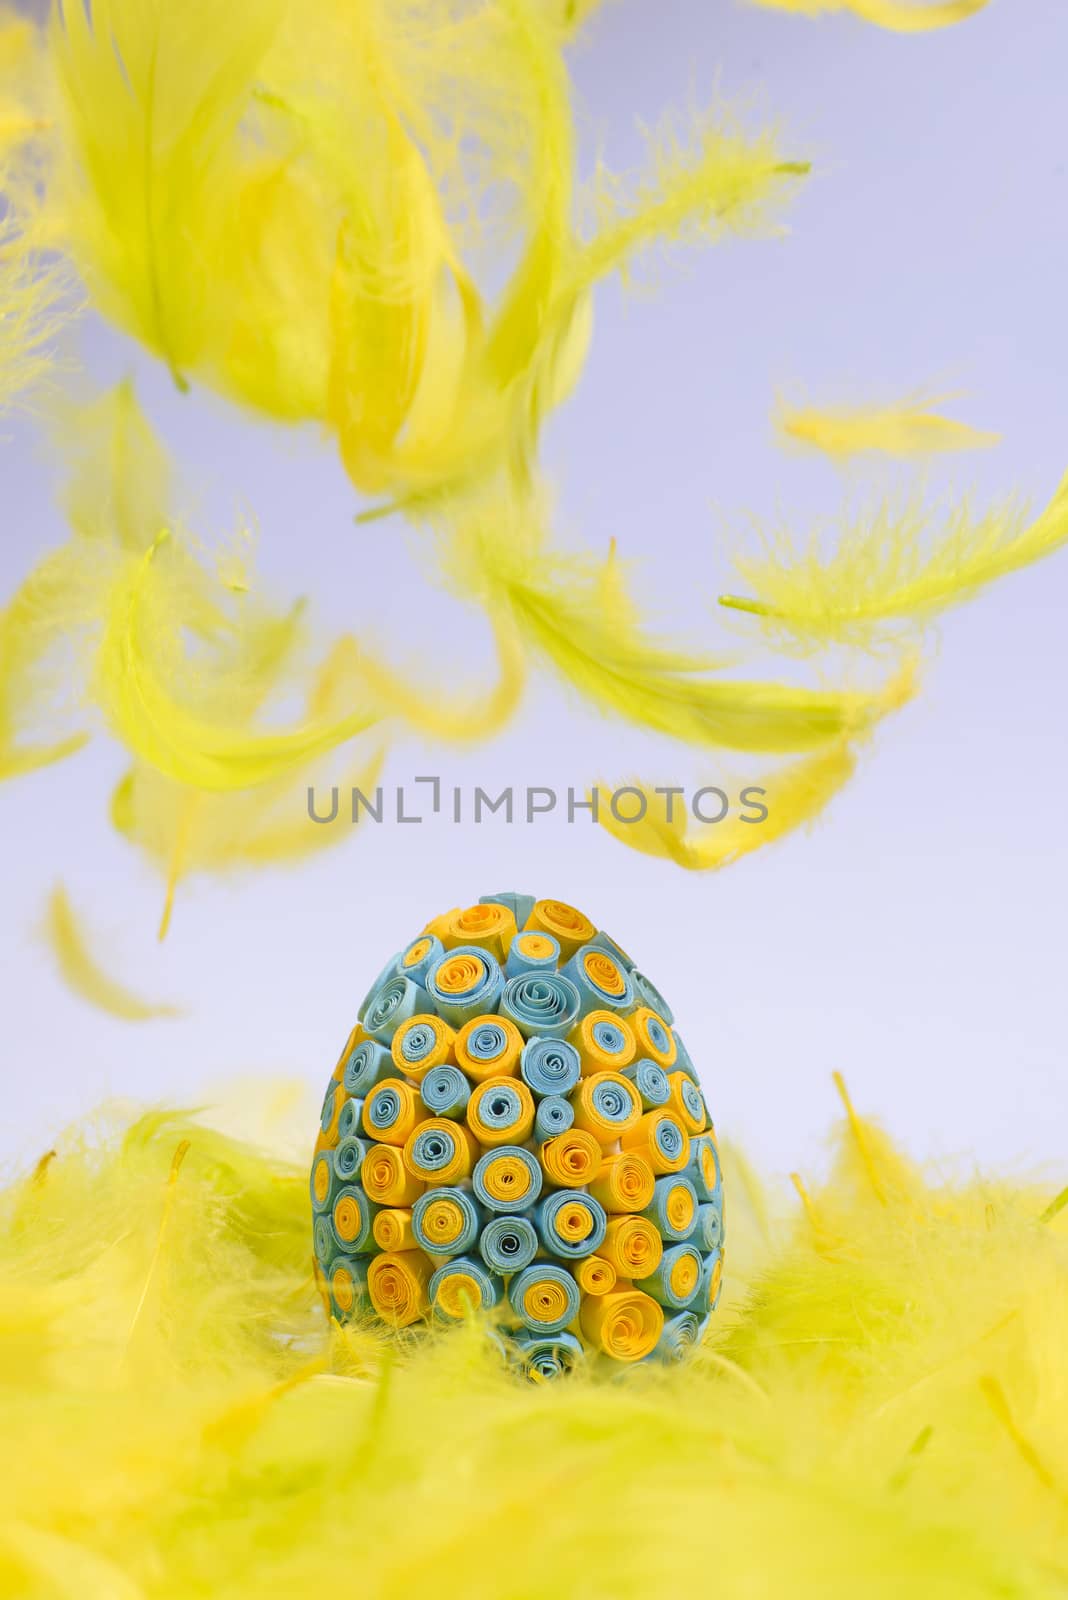 Funny, amusing and joyful photo of yellow and blue Easter egg lying in yellow feathers, visible feather falling down.